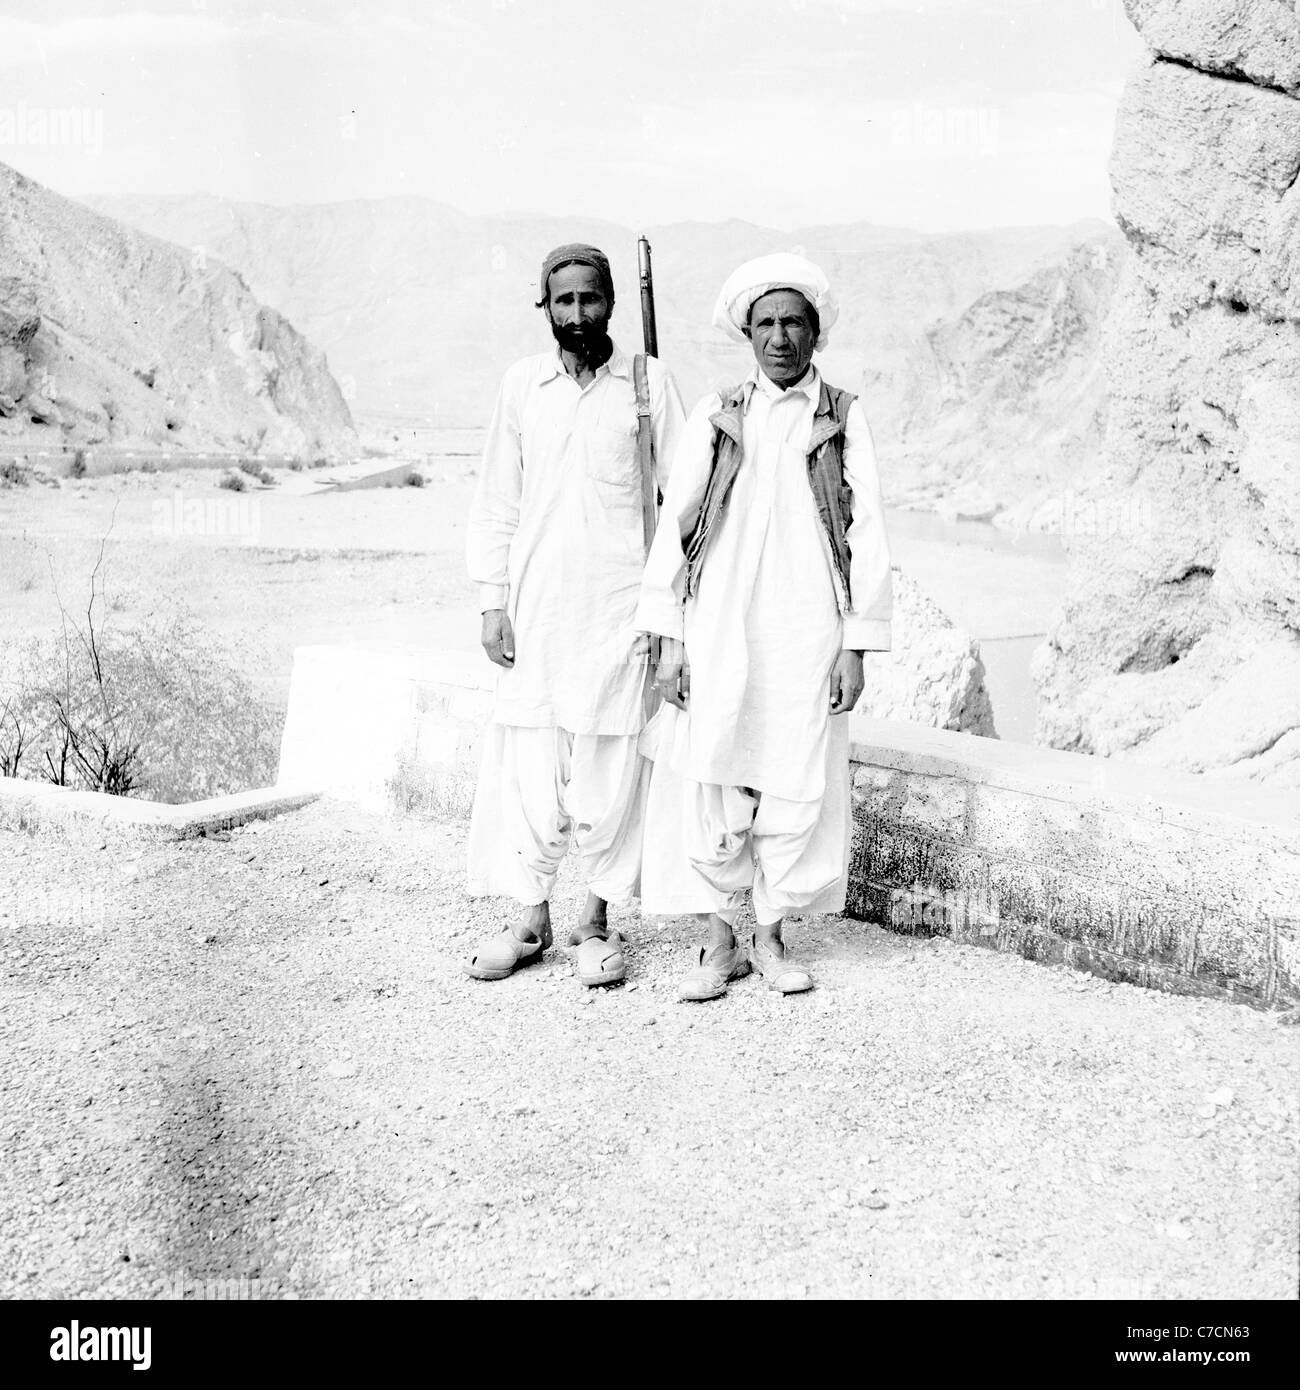 Two tribesmen or pashtuns, one armed with rifle, standing at the Bolan Pass, Pakistan. Taken in 1950s by J. Allan Cash. Stock Photo